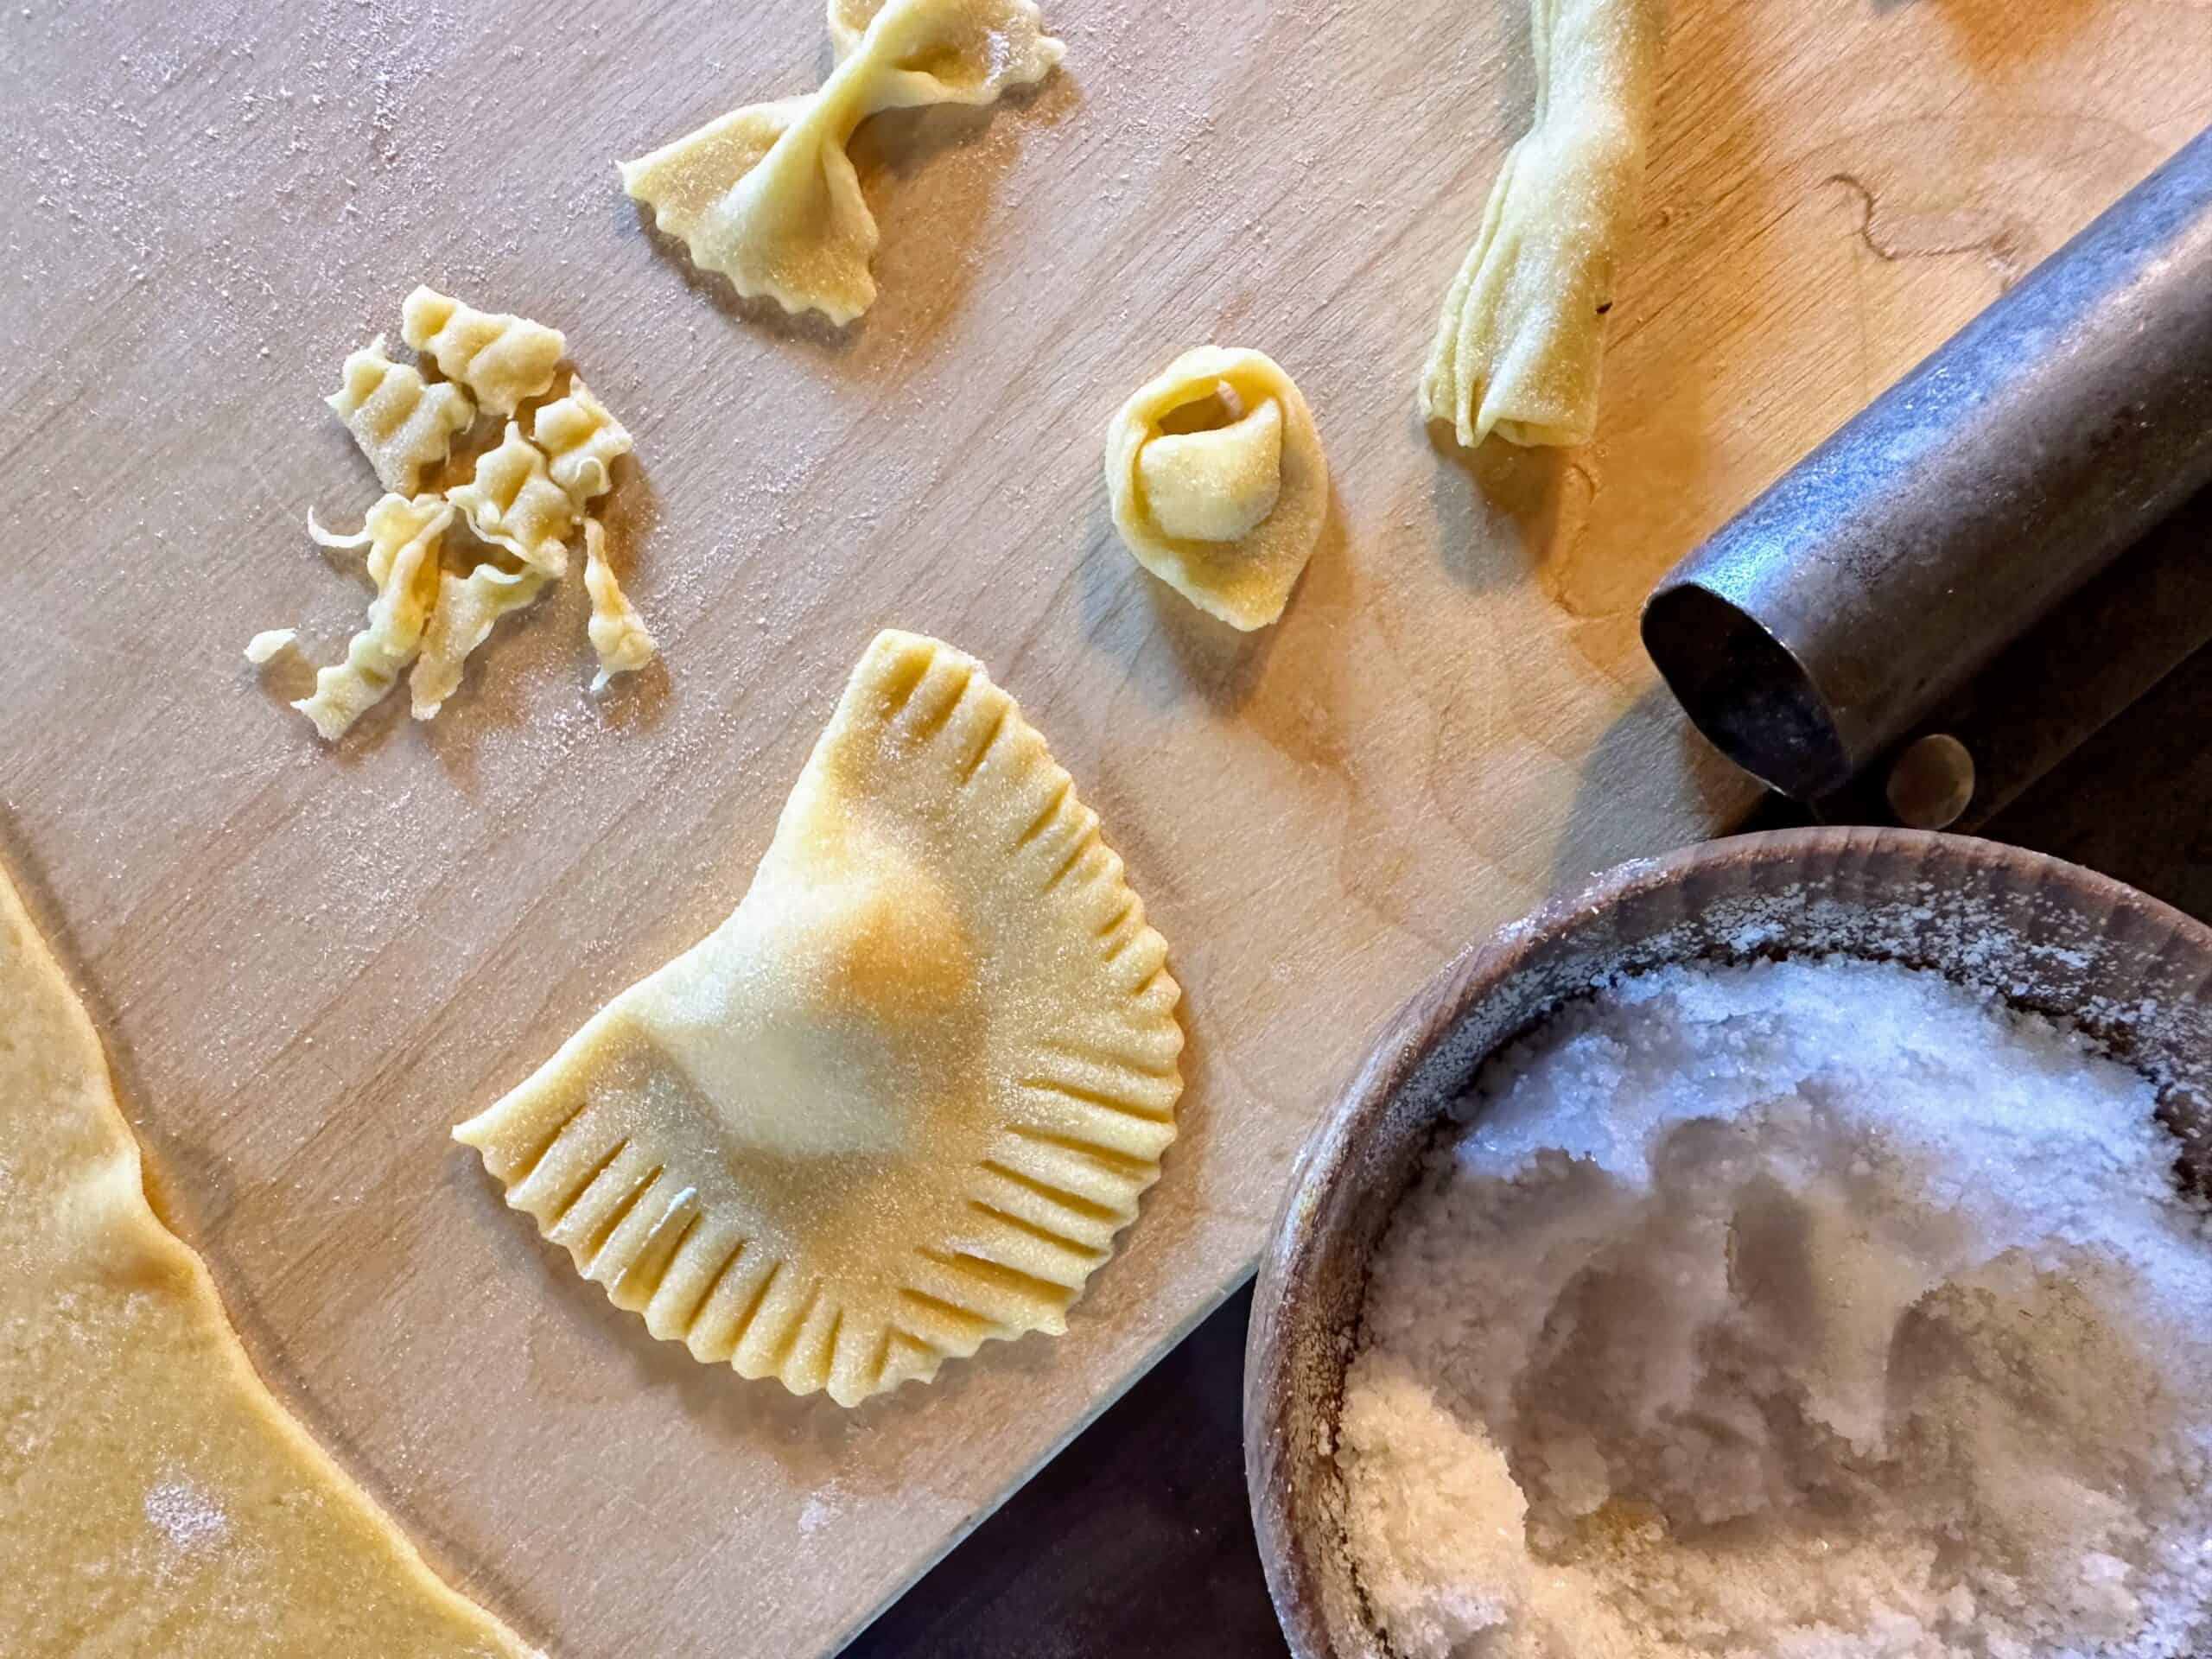 View of different fresh pasta shapes on wooden cutting board. Also small container of salt in lower right.